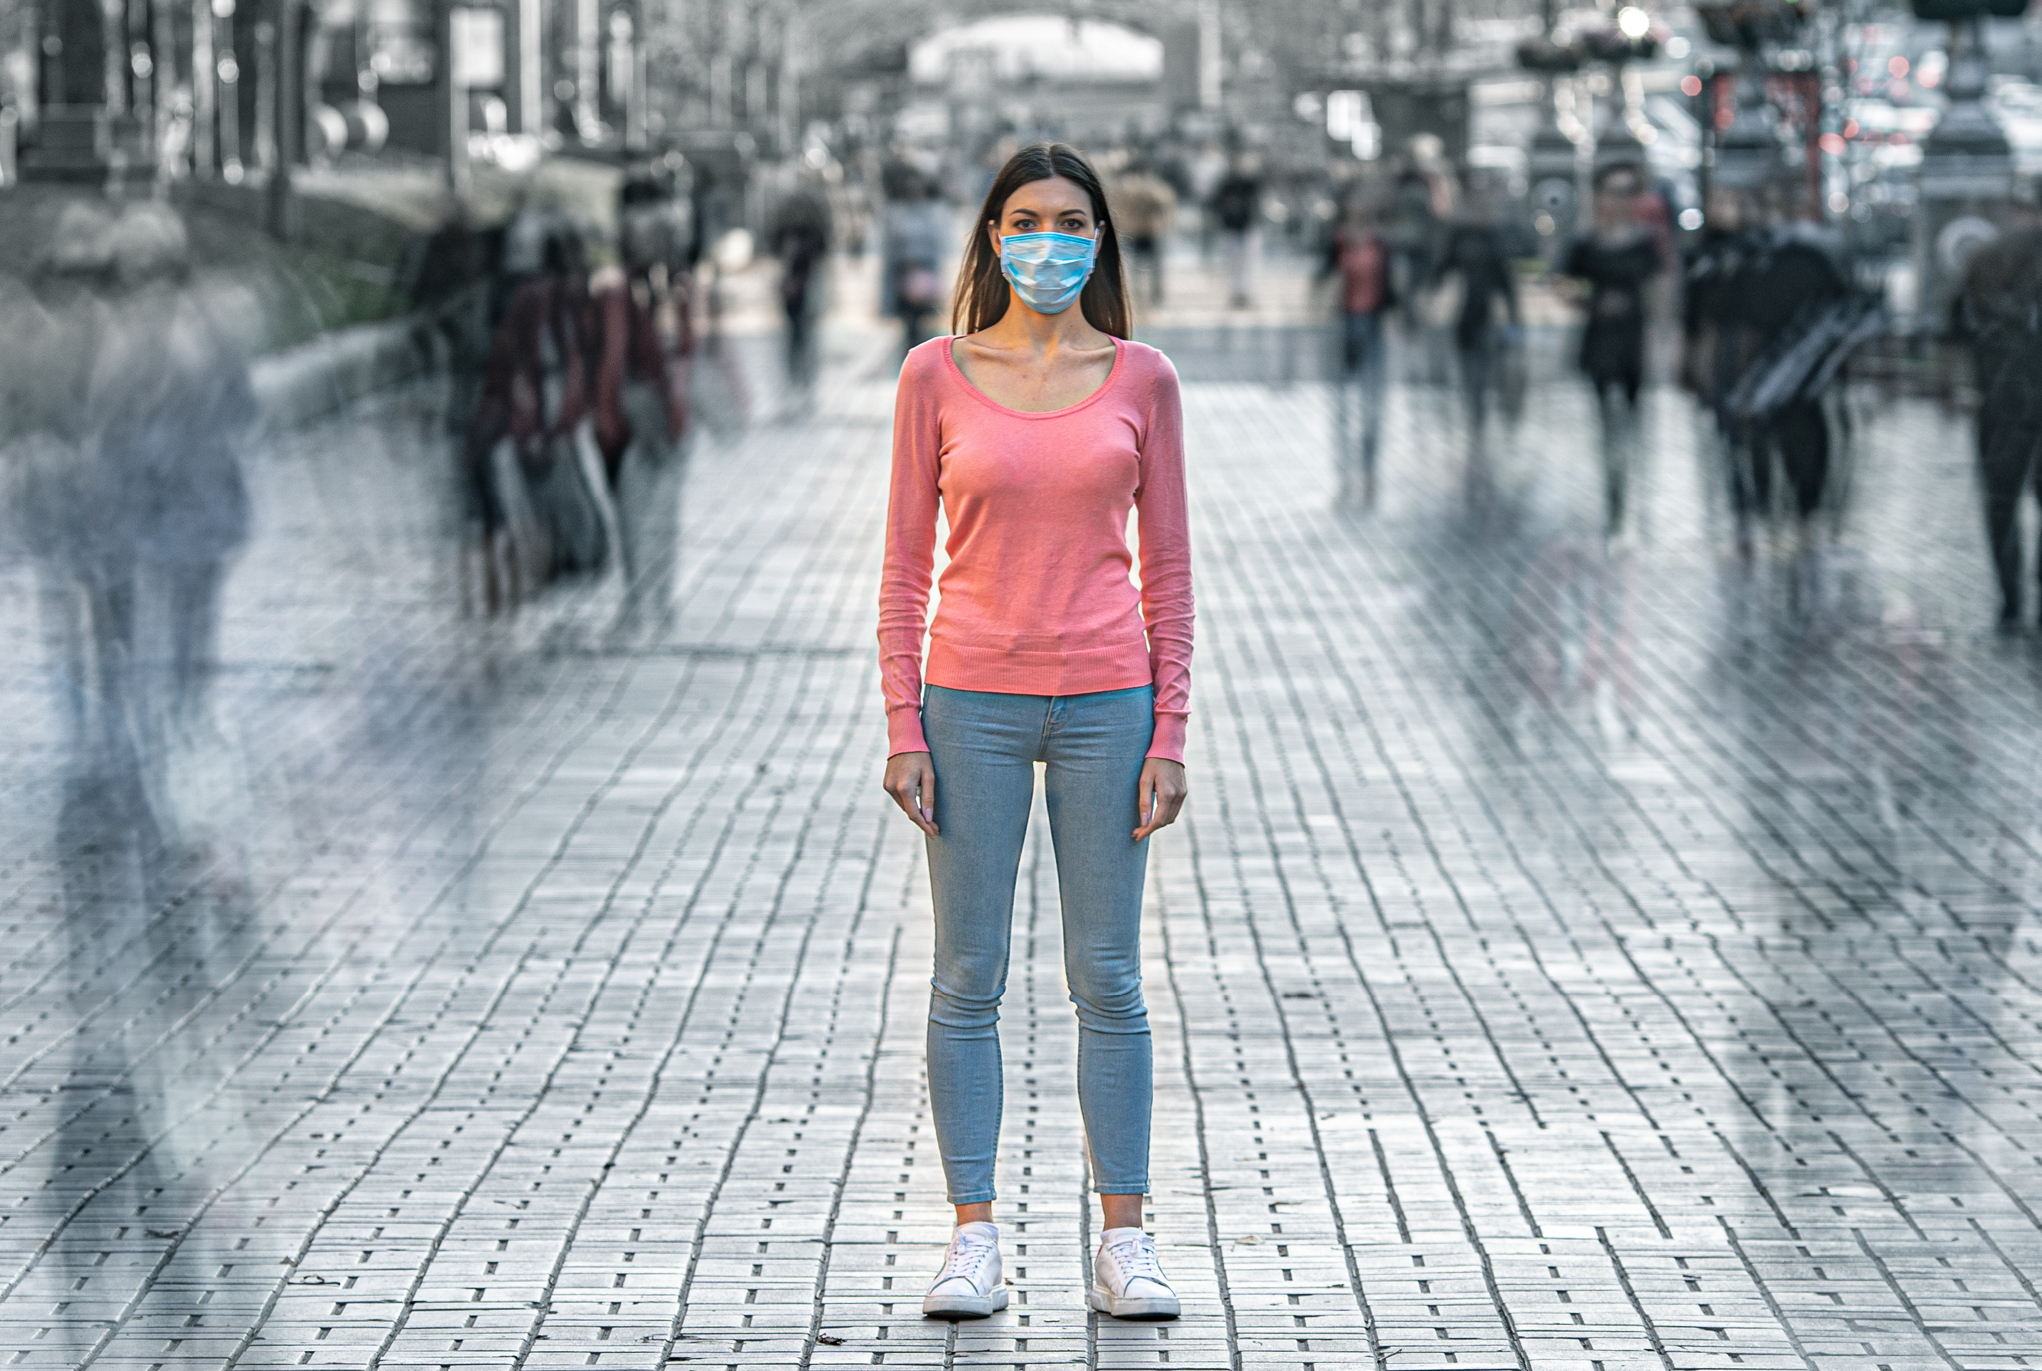 A woman standing on a city street wearing a face mask